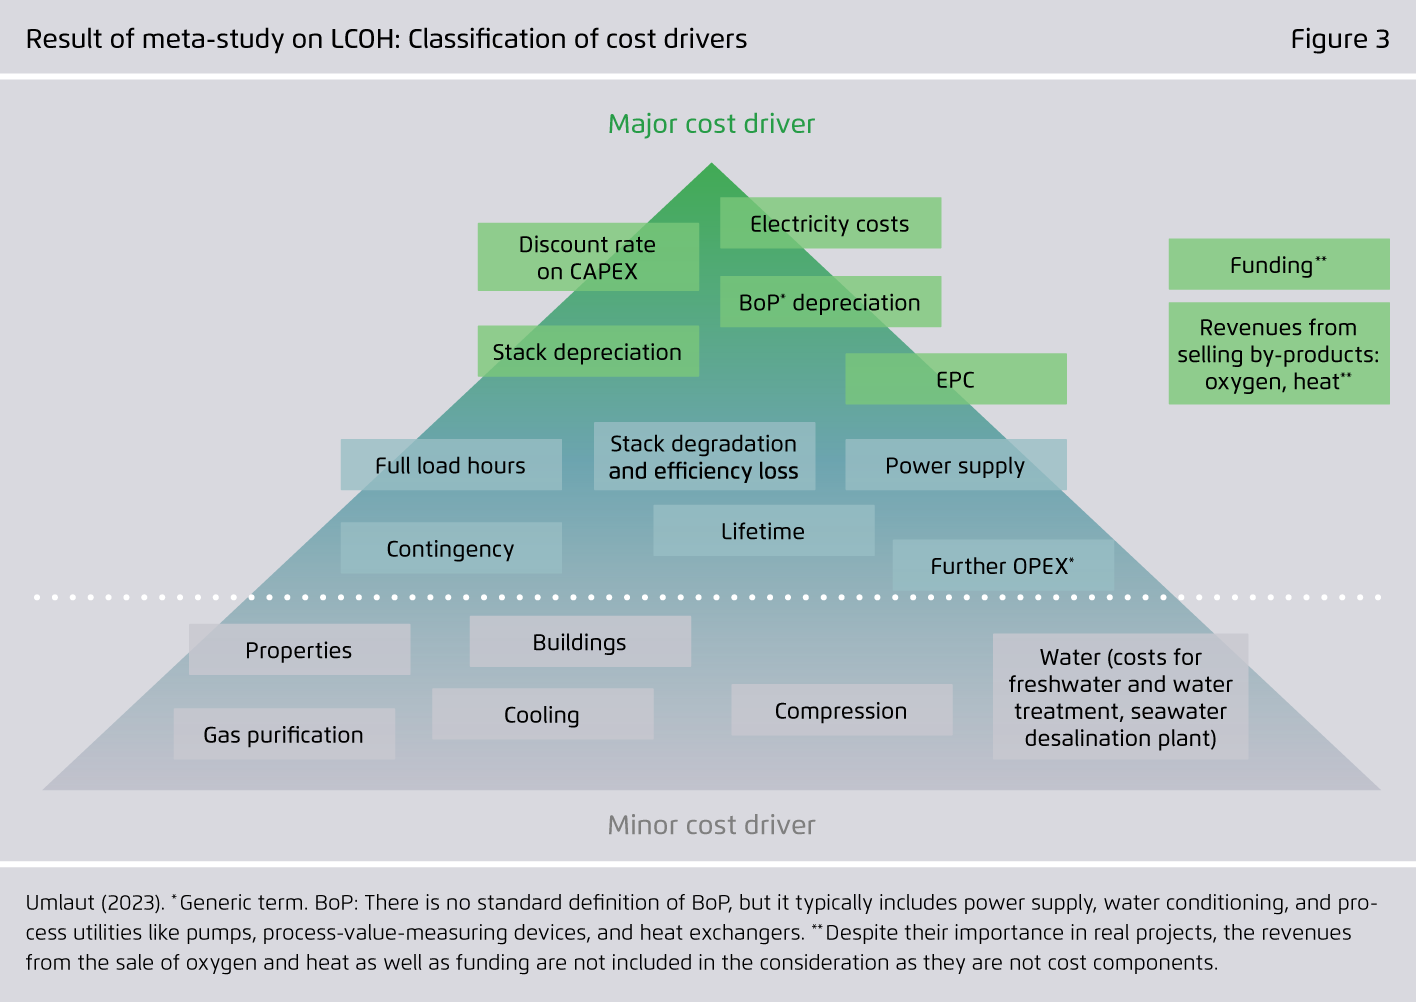 Preview for Result of meta-study on LCOH: Classification of cost drivers